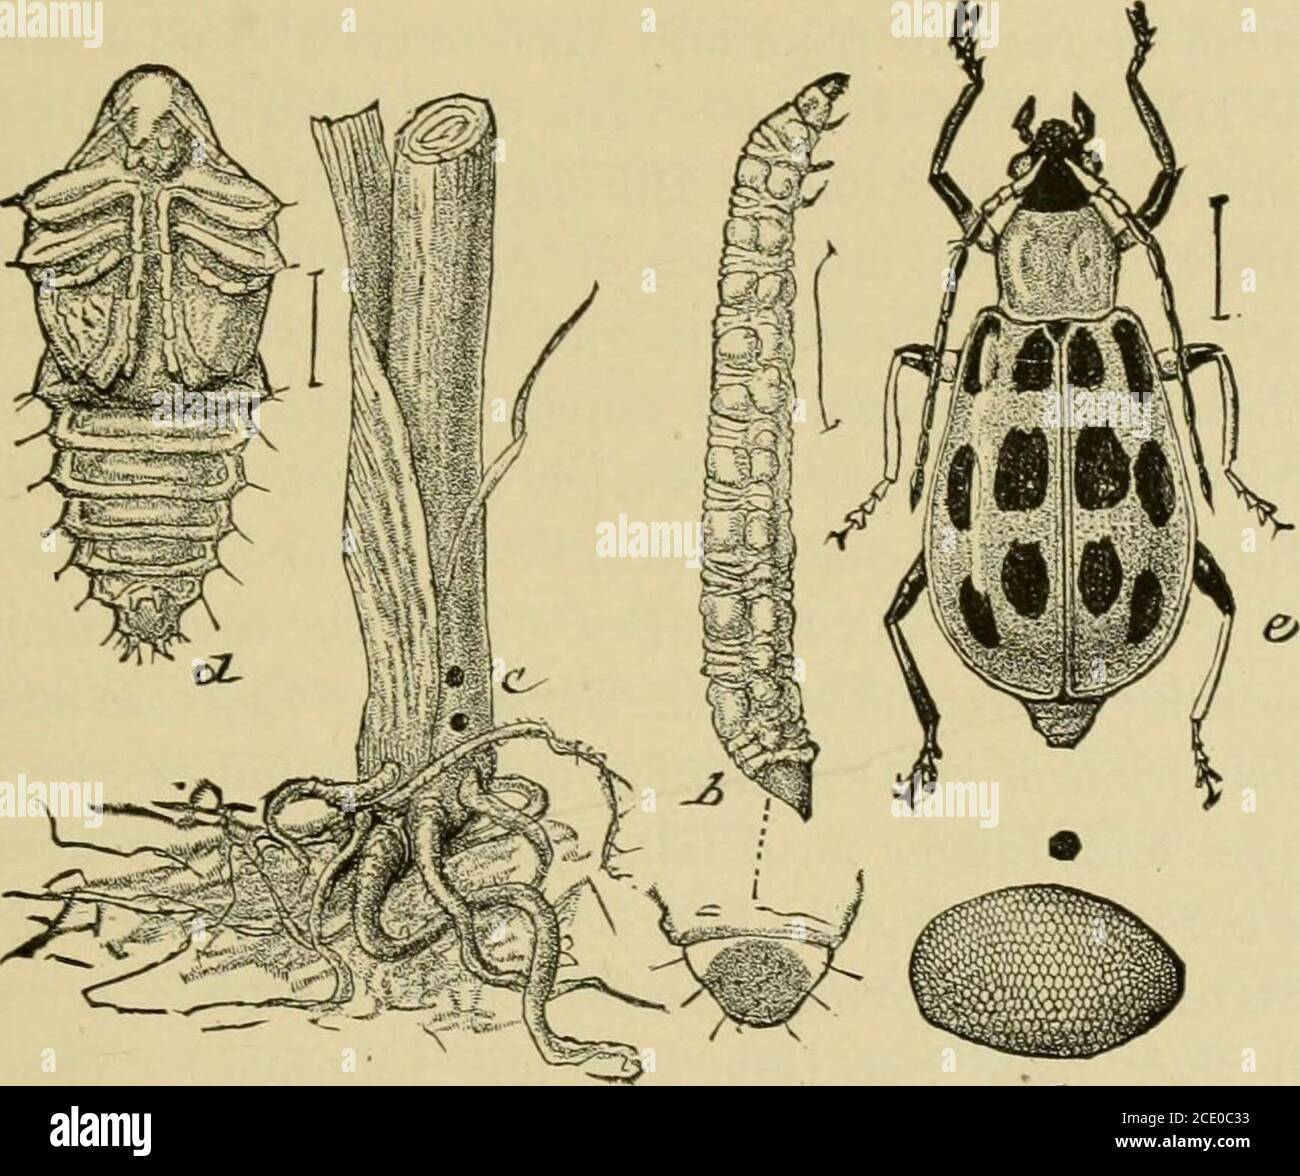 . Insect pests of farm, garden and orchard . ch the beetle has beenobserved feeding in large numbers on clover and weeds during thelate fall of the previous year. The liljeral use of manure and fer-tilizers, and thorough cultivation will, of course, be of service inenabling the plants to withstand attack. The Southern Corn Root-worm * Closely related to the last species, but with somewhat differenthabits, the Southern Corn Root-worm is frequently injurious tocorn from Maryland and southern Ohio southward. * Dinhrotica Vl-puncUita Oliv. Family Chrymmelidoe. INSECTS INJURIOUS TO CORN 159 The adu Stock Photo